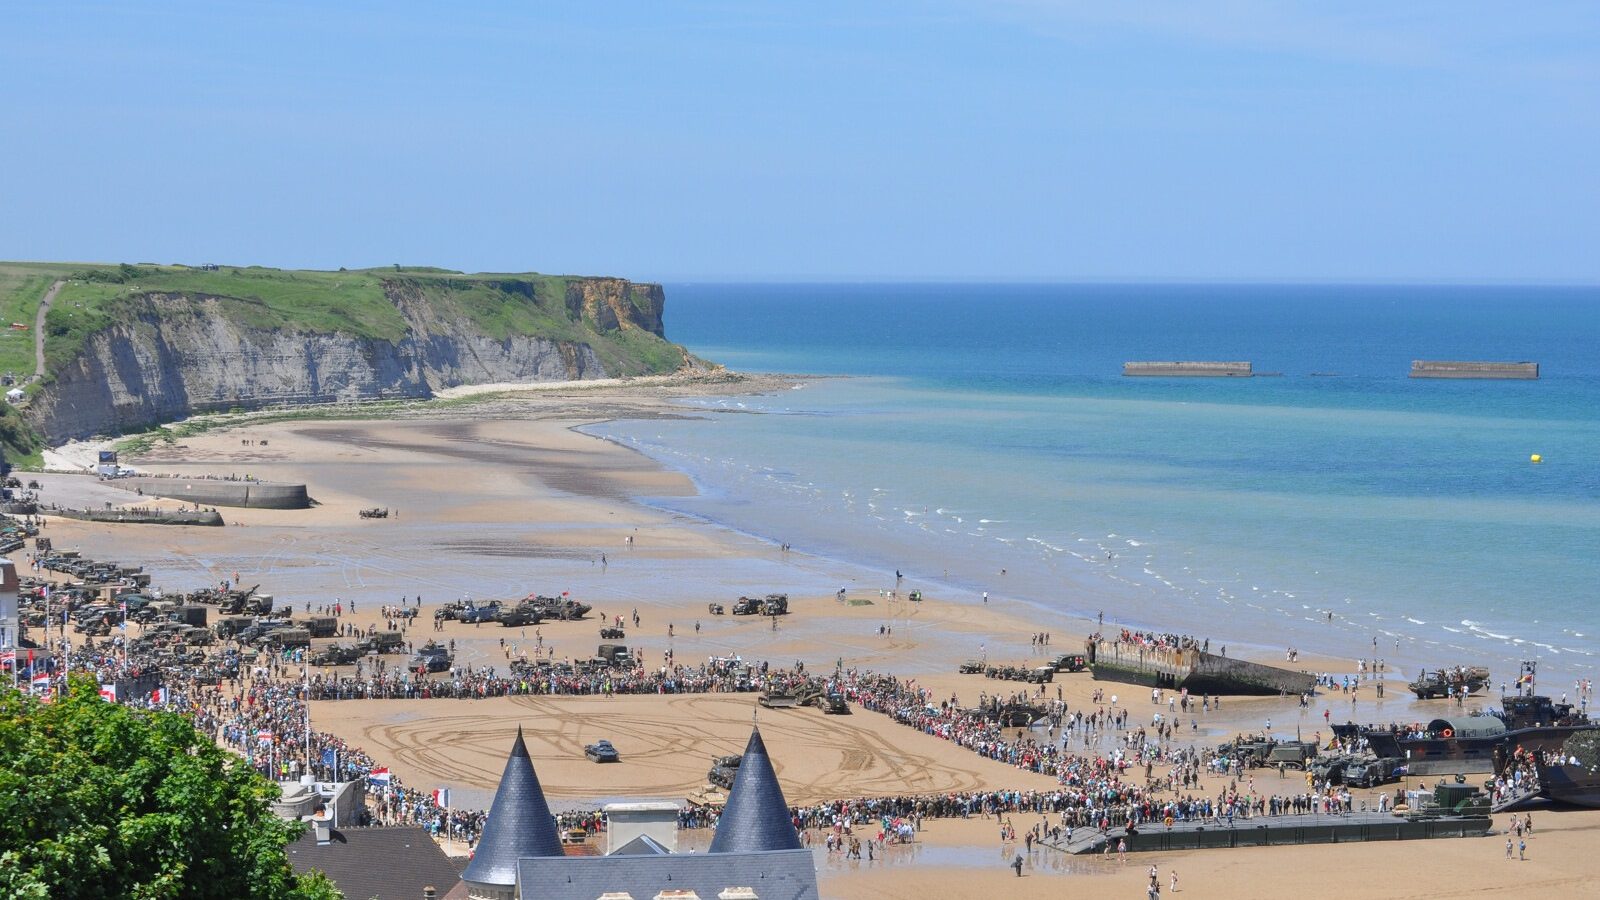 1944 – 2024: 80th Anniversary of D-Day and the Battle of Normandy